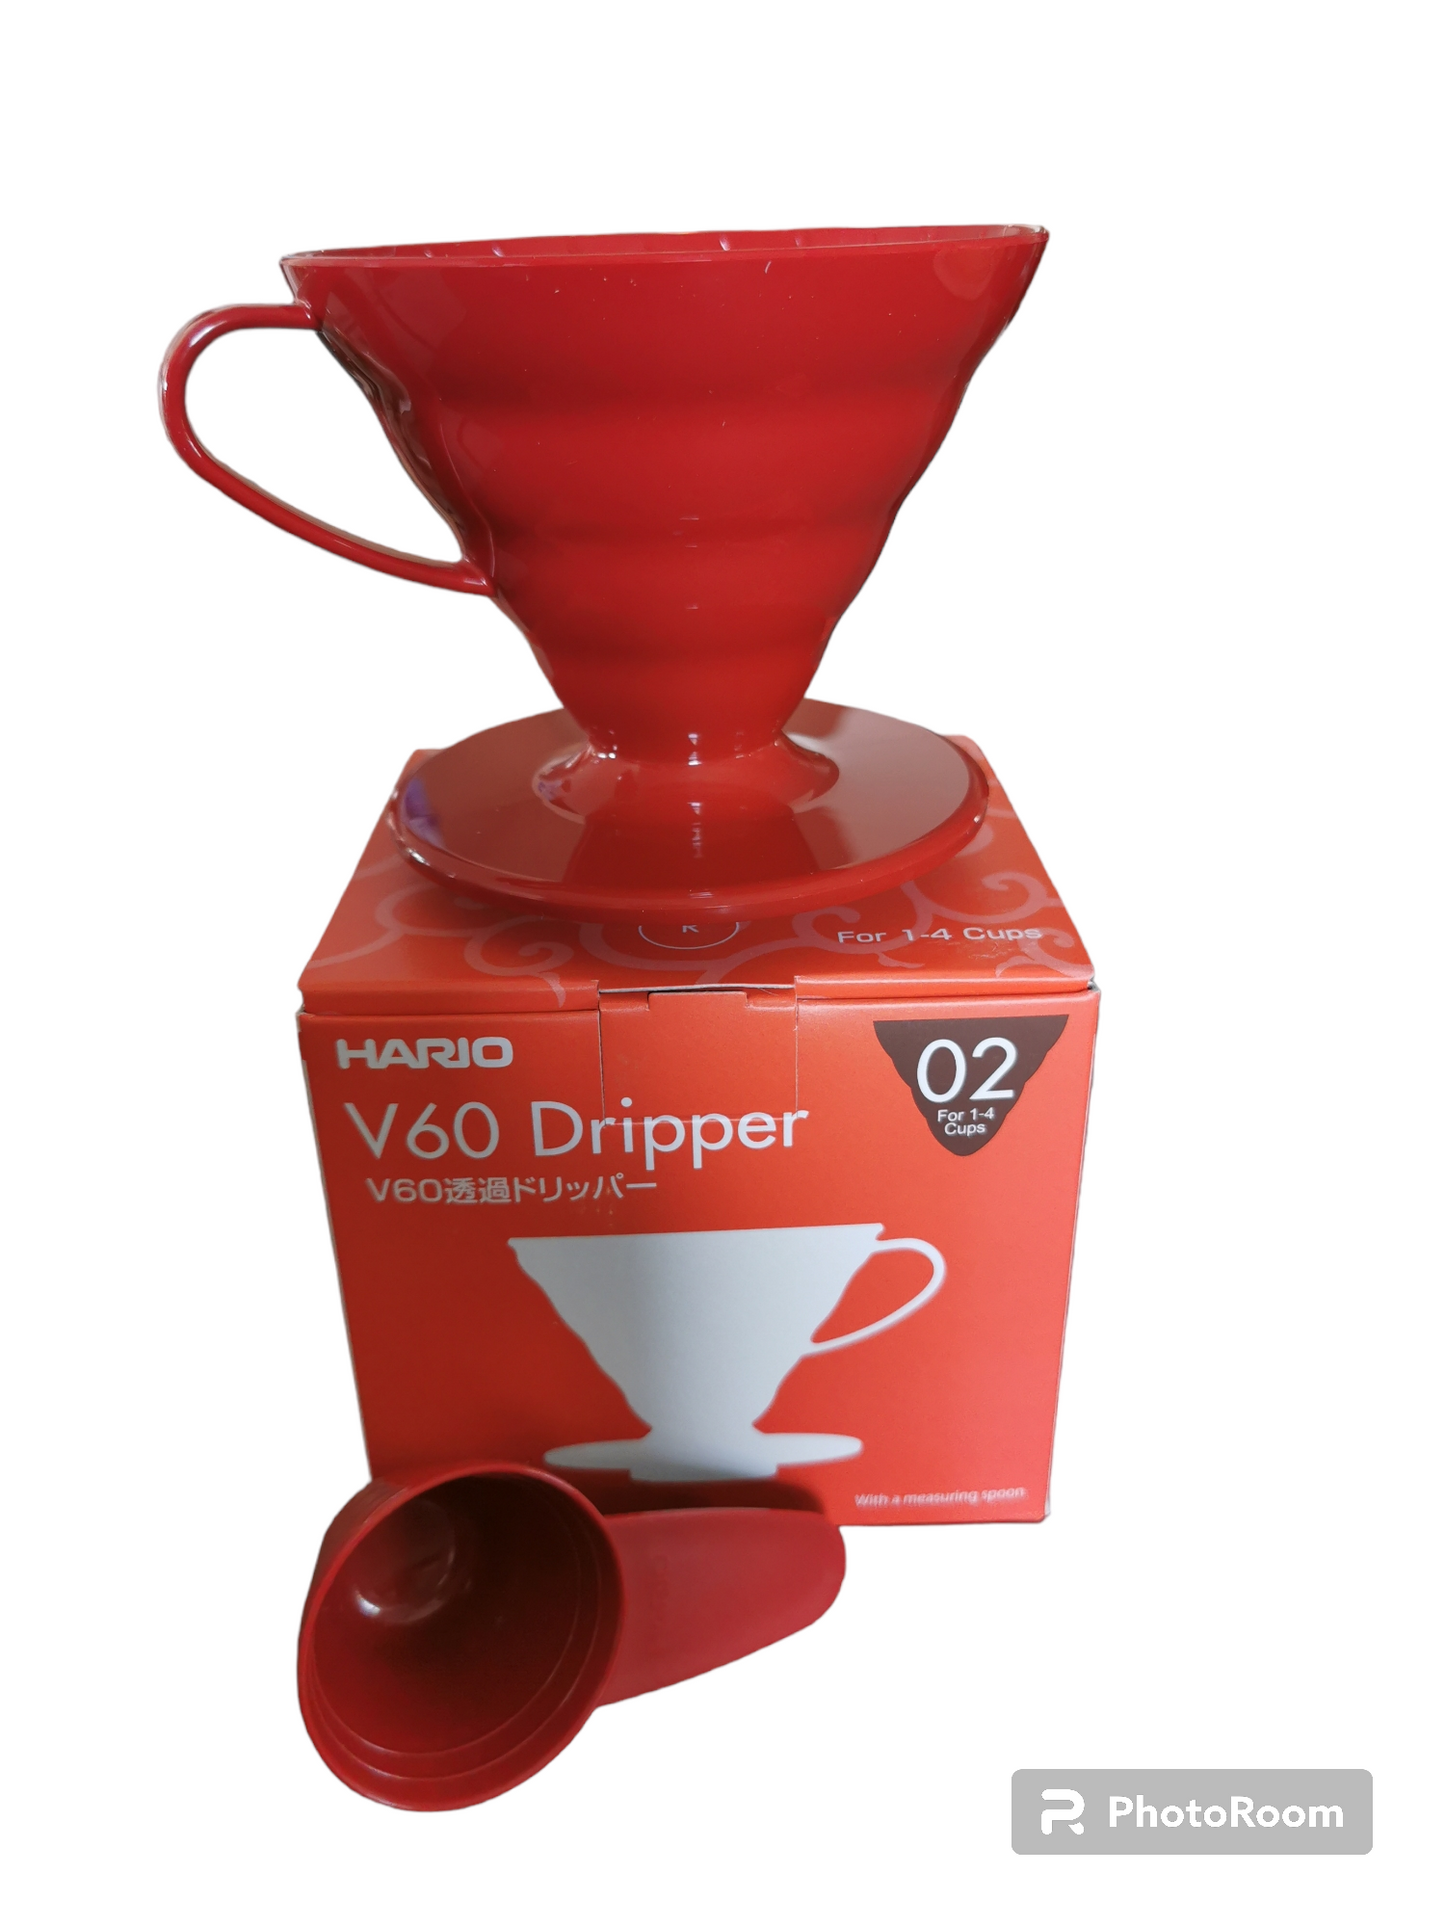 V60-02 Dripper - 4 colours to pick from